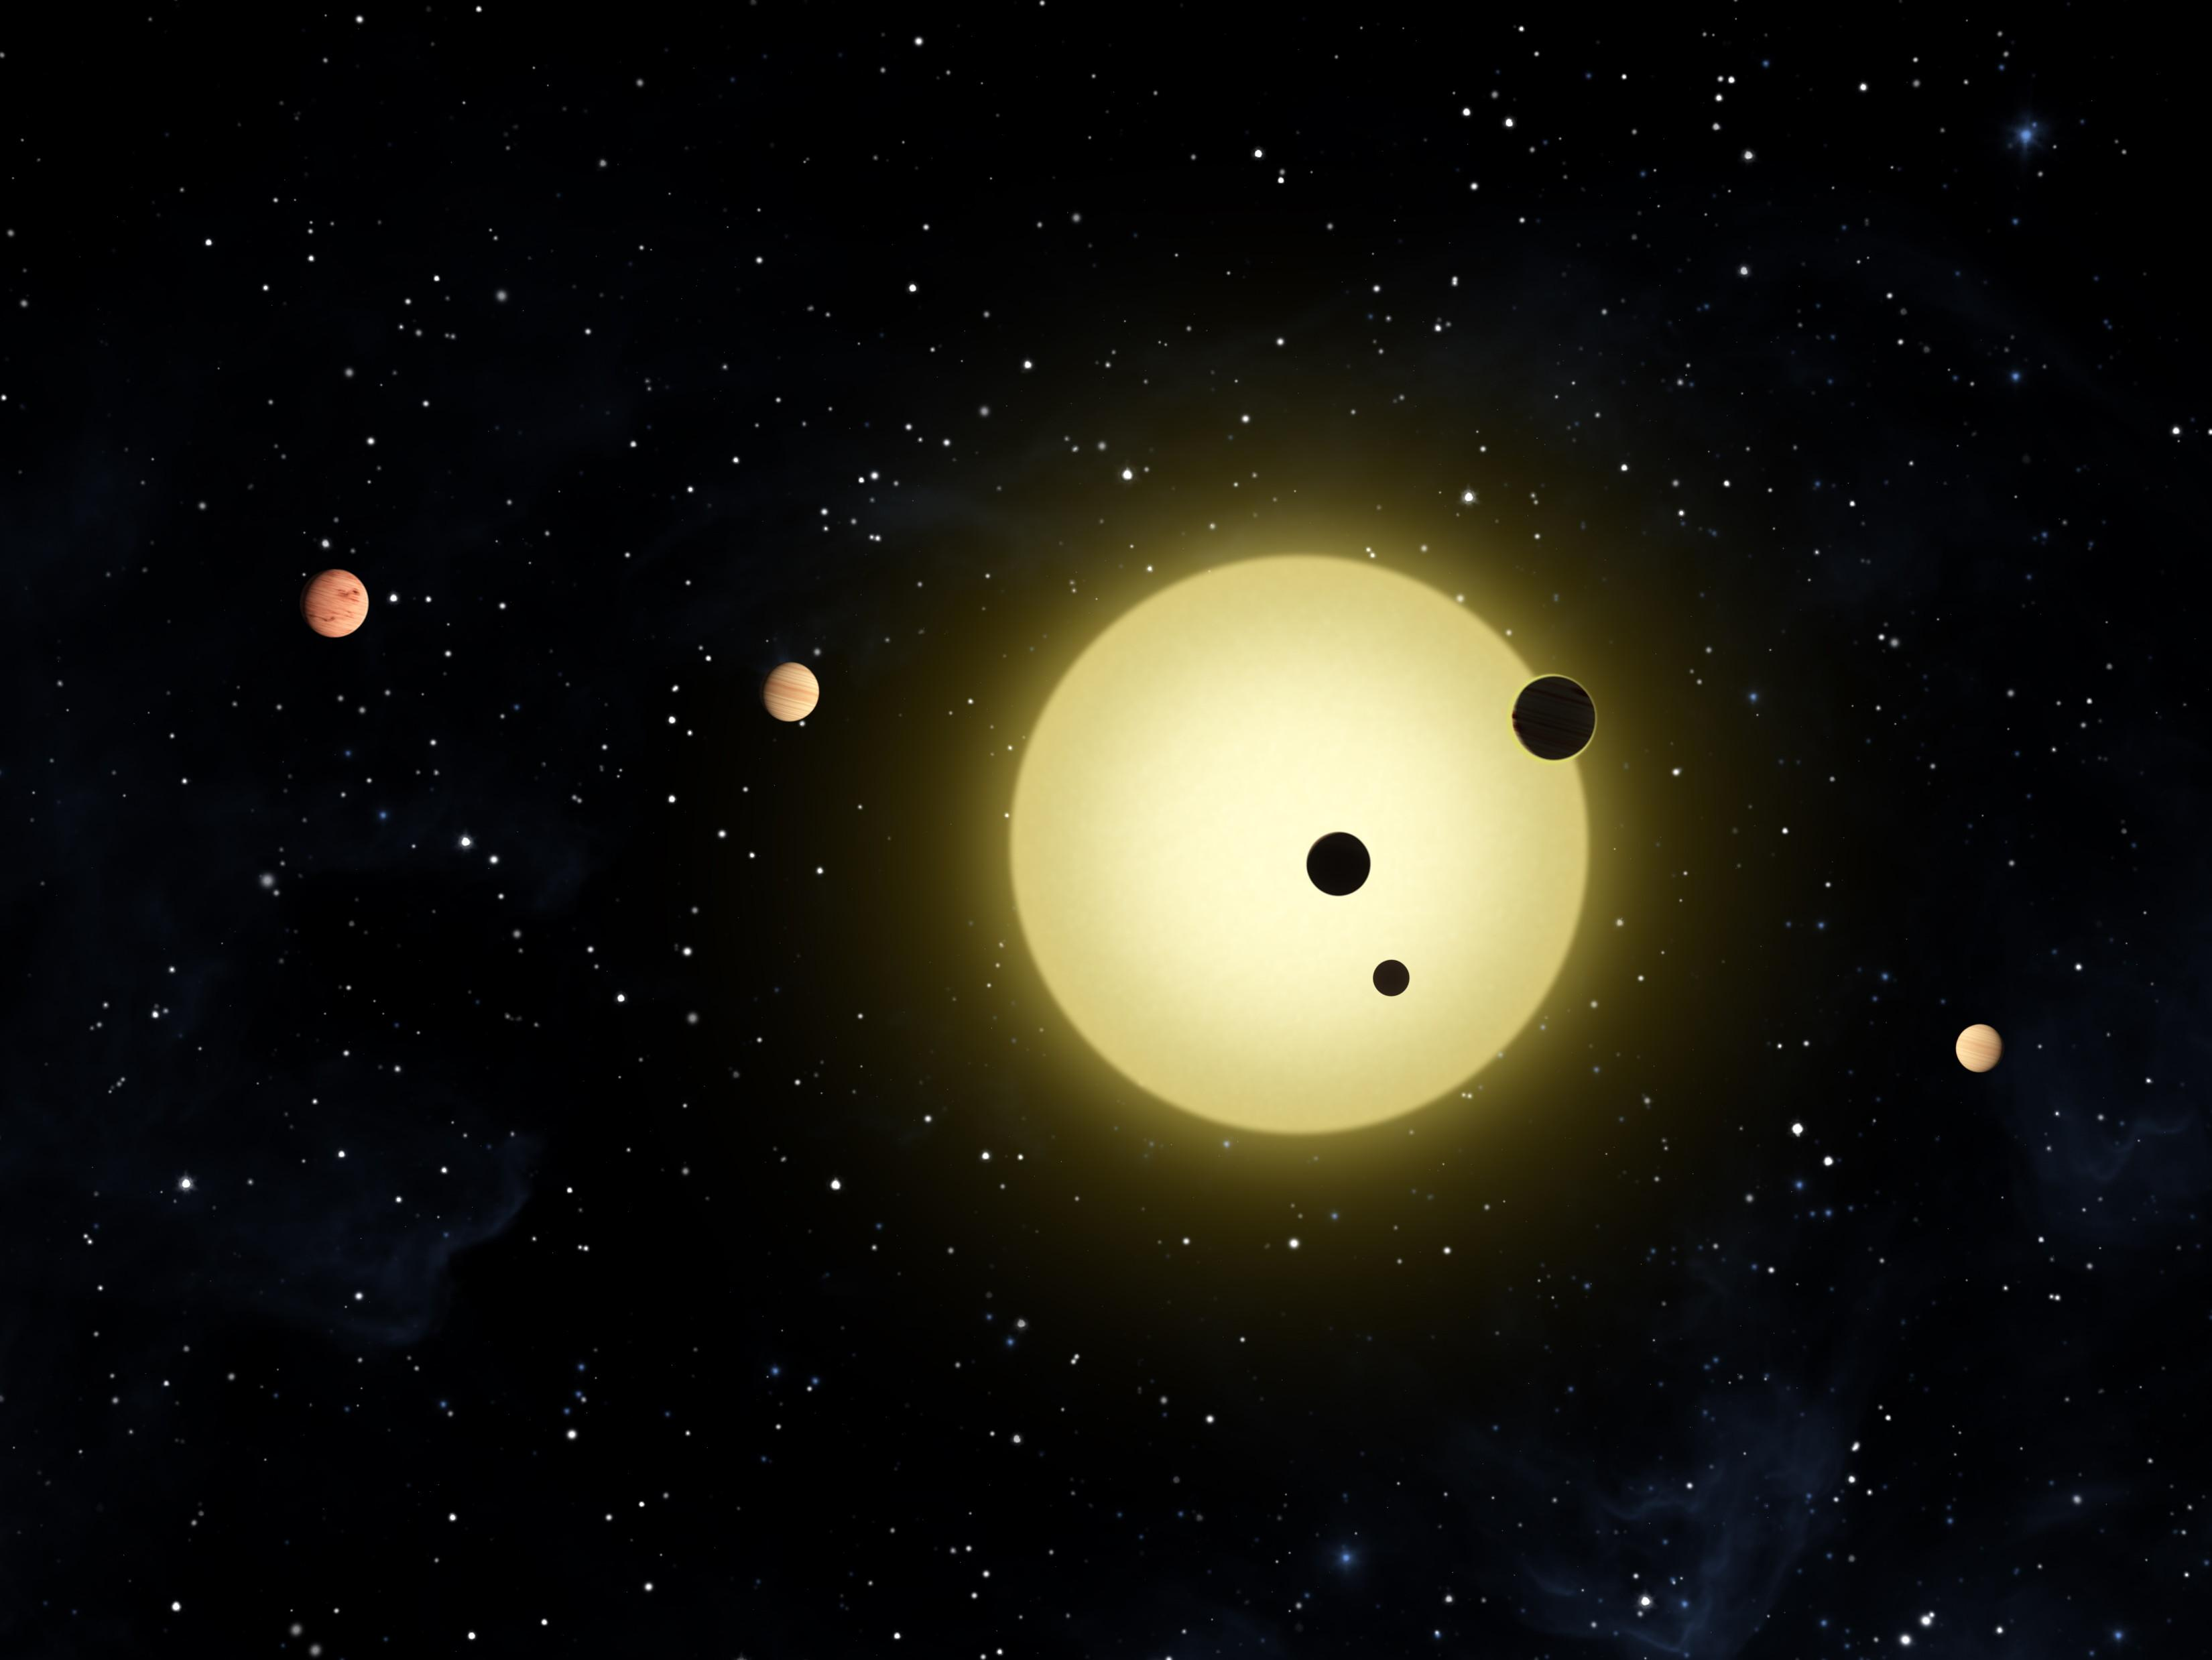 Depiction of planets around a sun